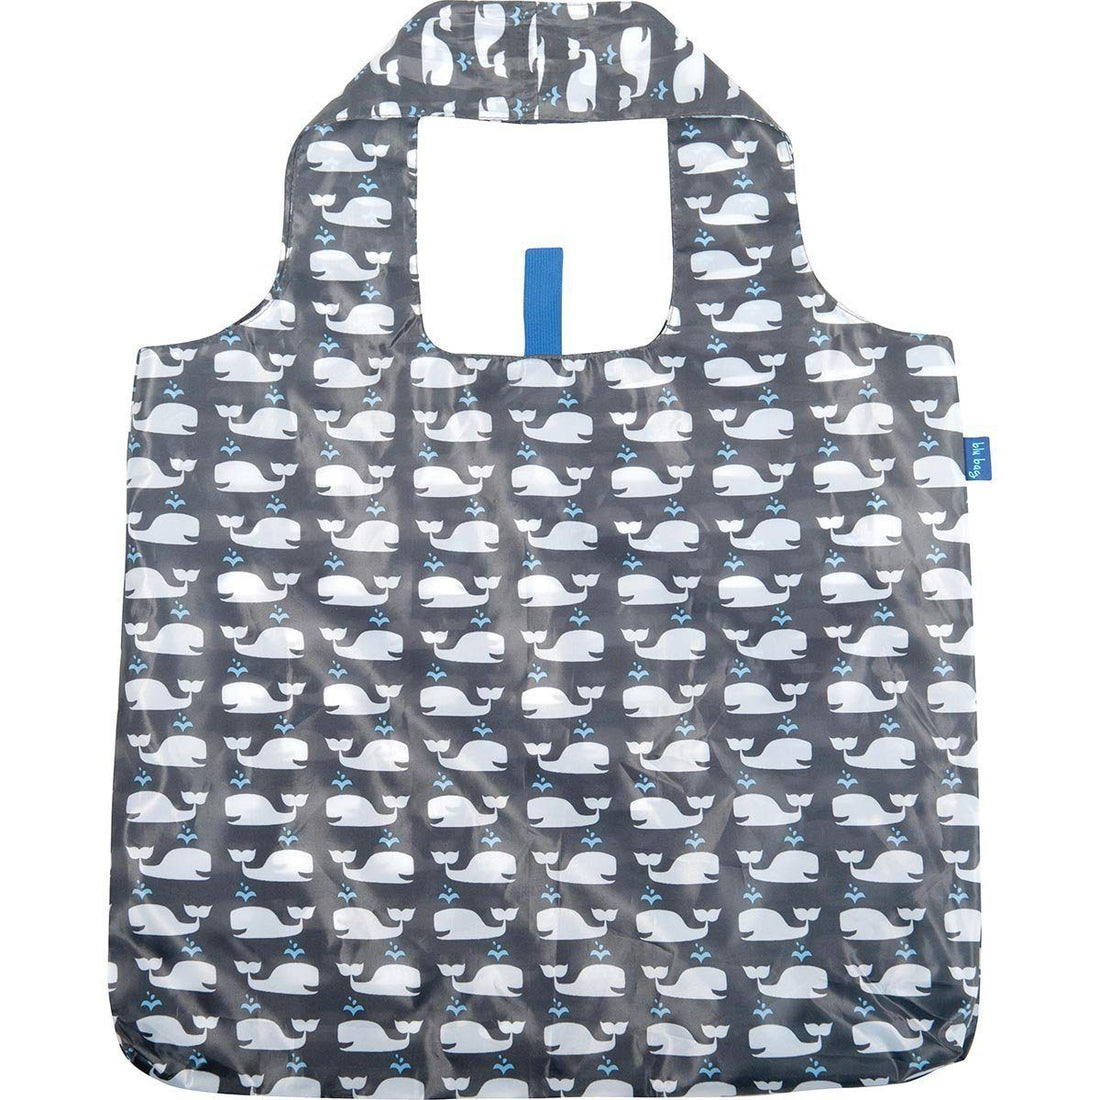 Blu Bags - Eco Friendly, Reusable Grocery Bags & Totes